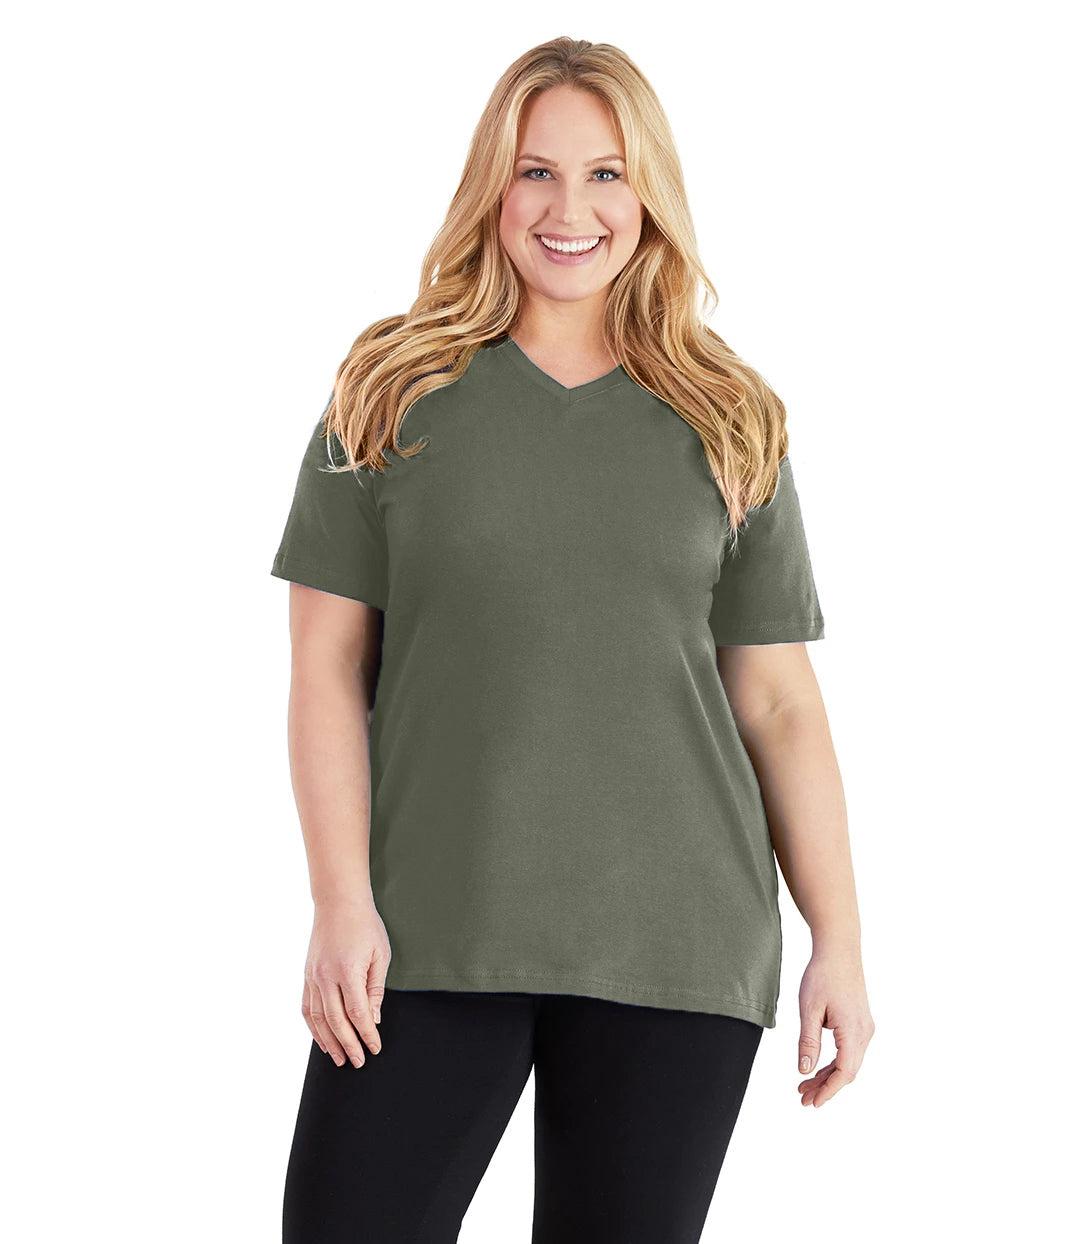 Plus size woman, facing front, wearing JunoActive plus size Stretch Naturals V-Neck in the color Moss Green. She is wearing JunoActive Plus Size Leggings in the color black.